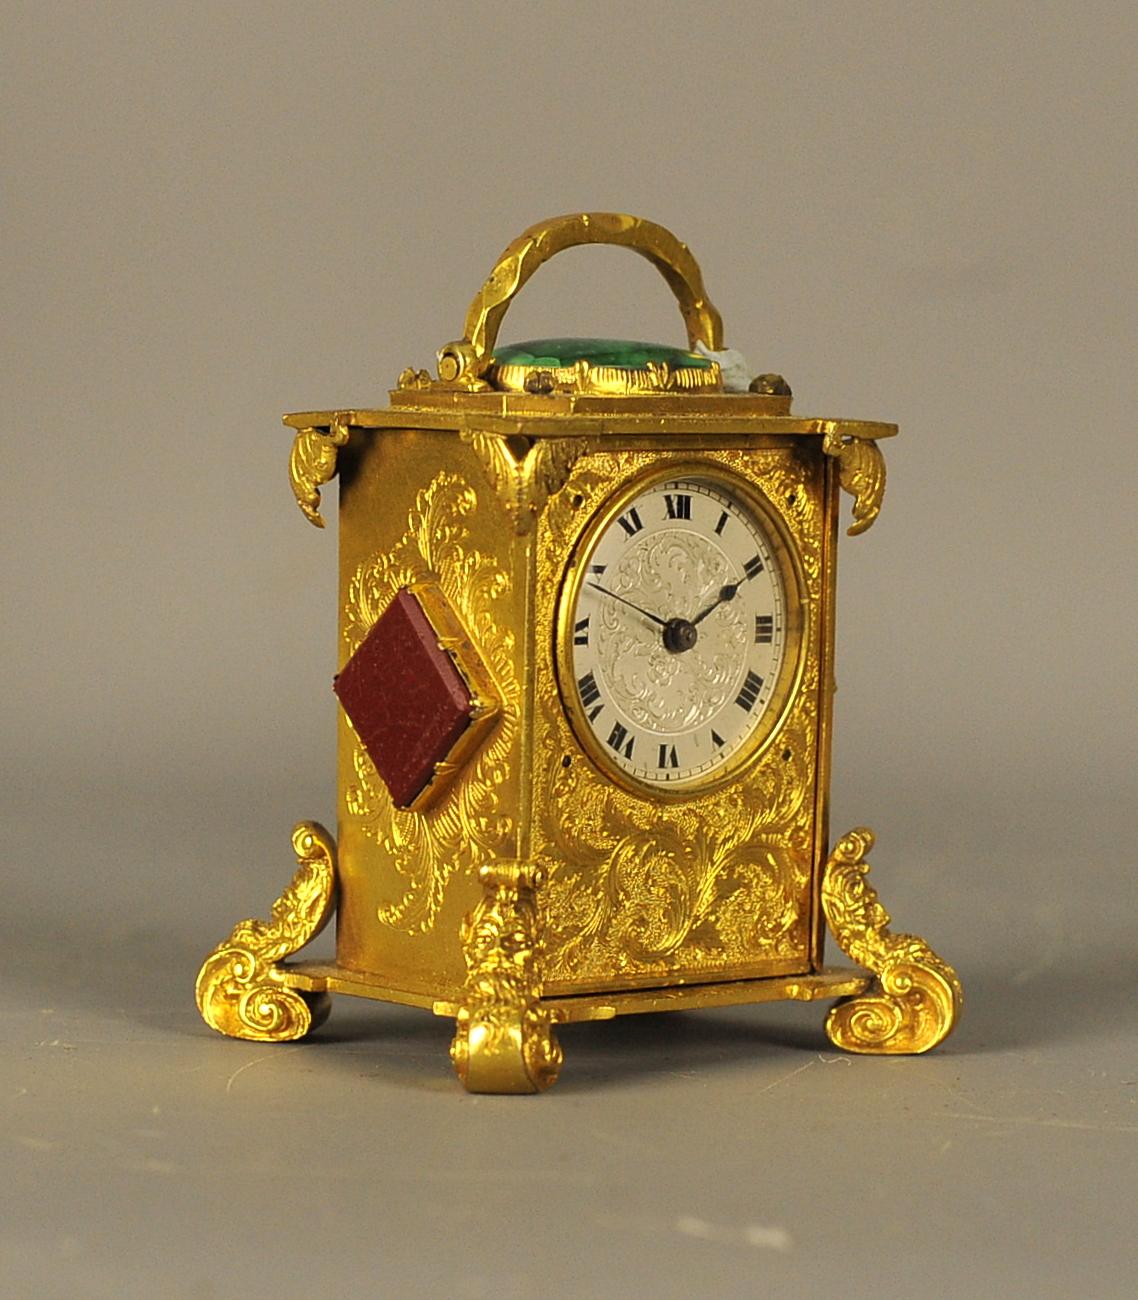 This is an extremely rare and beautiful ormolu-mounted miniature timepiece carriage clock with thermometer and agate lozenges panels to the side and a malachite cabochon to the top which is in wonderful original condition.
The case is beautifully